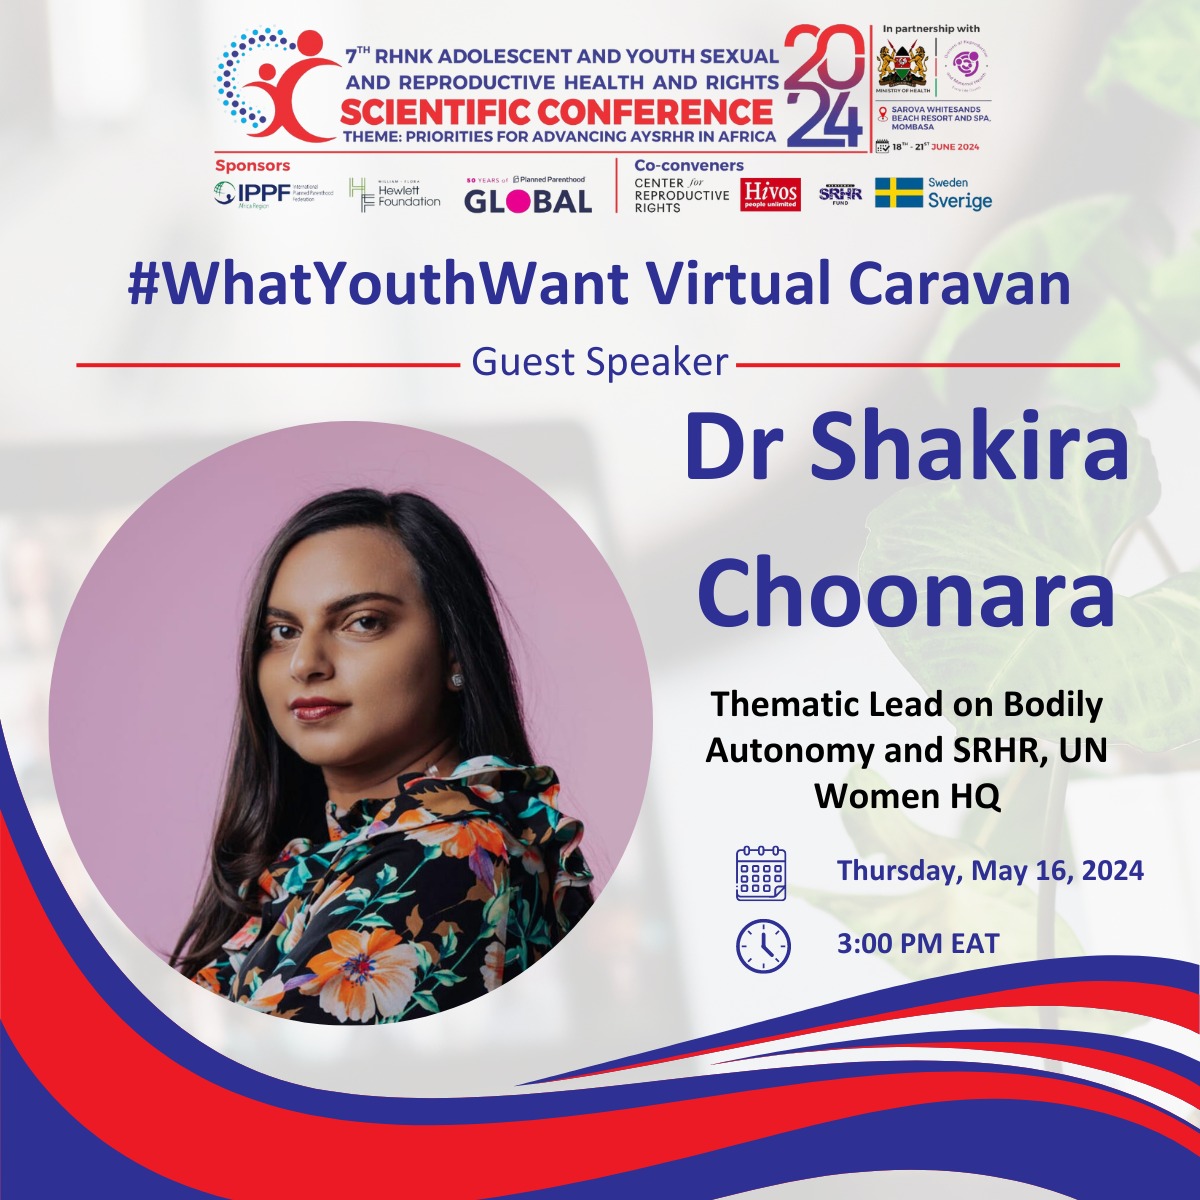 Exciting update! @ShakiraChoonara from UN Women will be sharing her insights on AYSRH and Innovations. Join our virtual event to explore impactful practices and connect. Register now for the #RHNKConference2024: us02web.zoom.us/meeting/regist @rhnkorg @IPPFAR @Hewlett_Found @SrhKenya